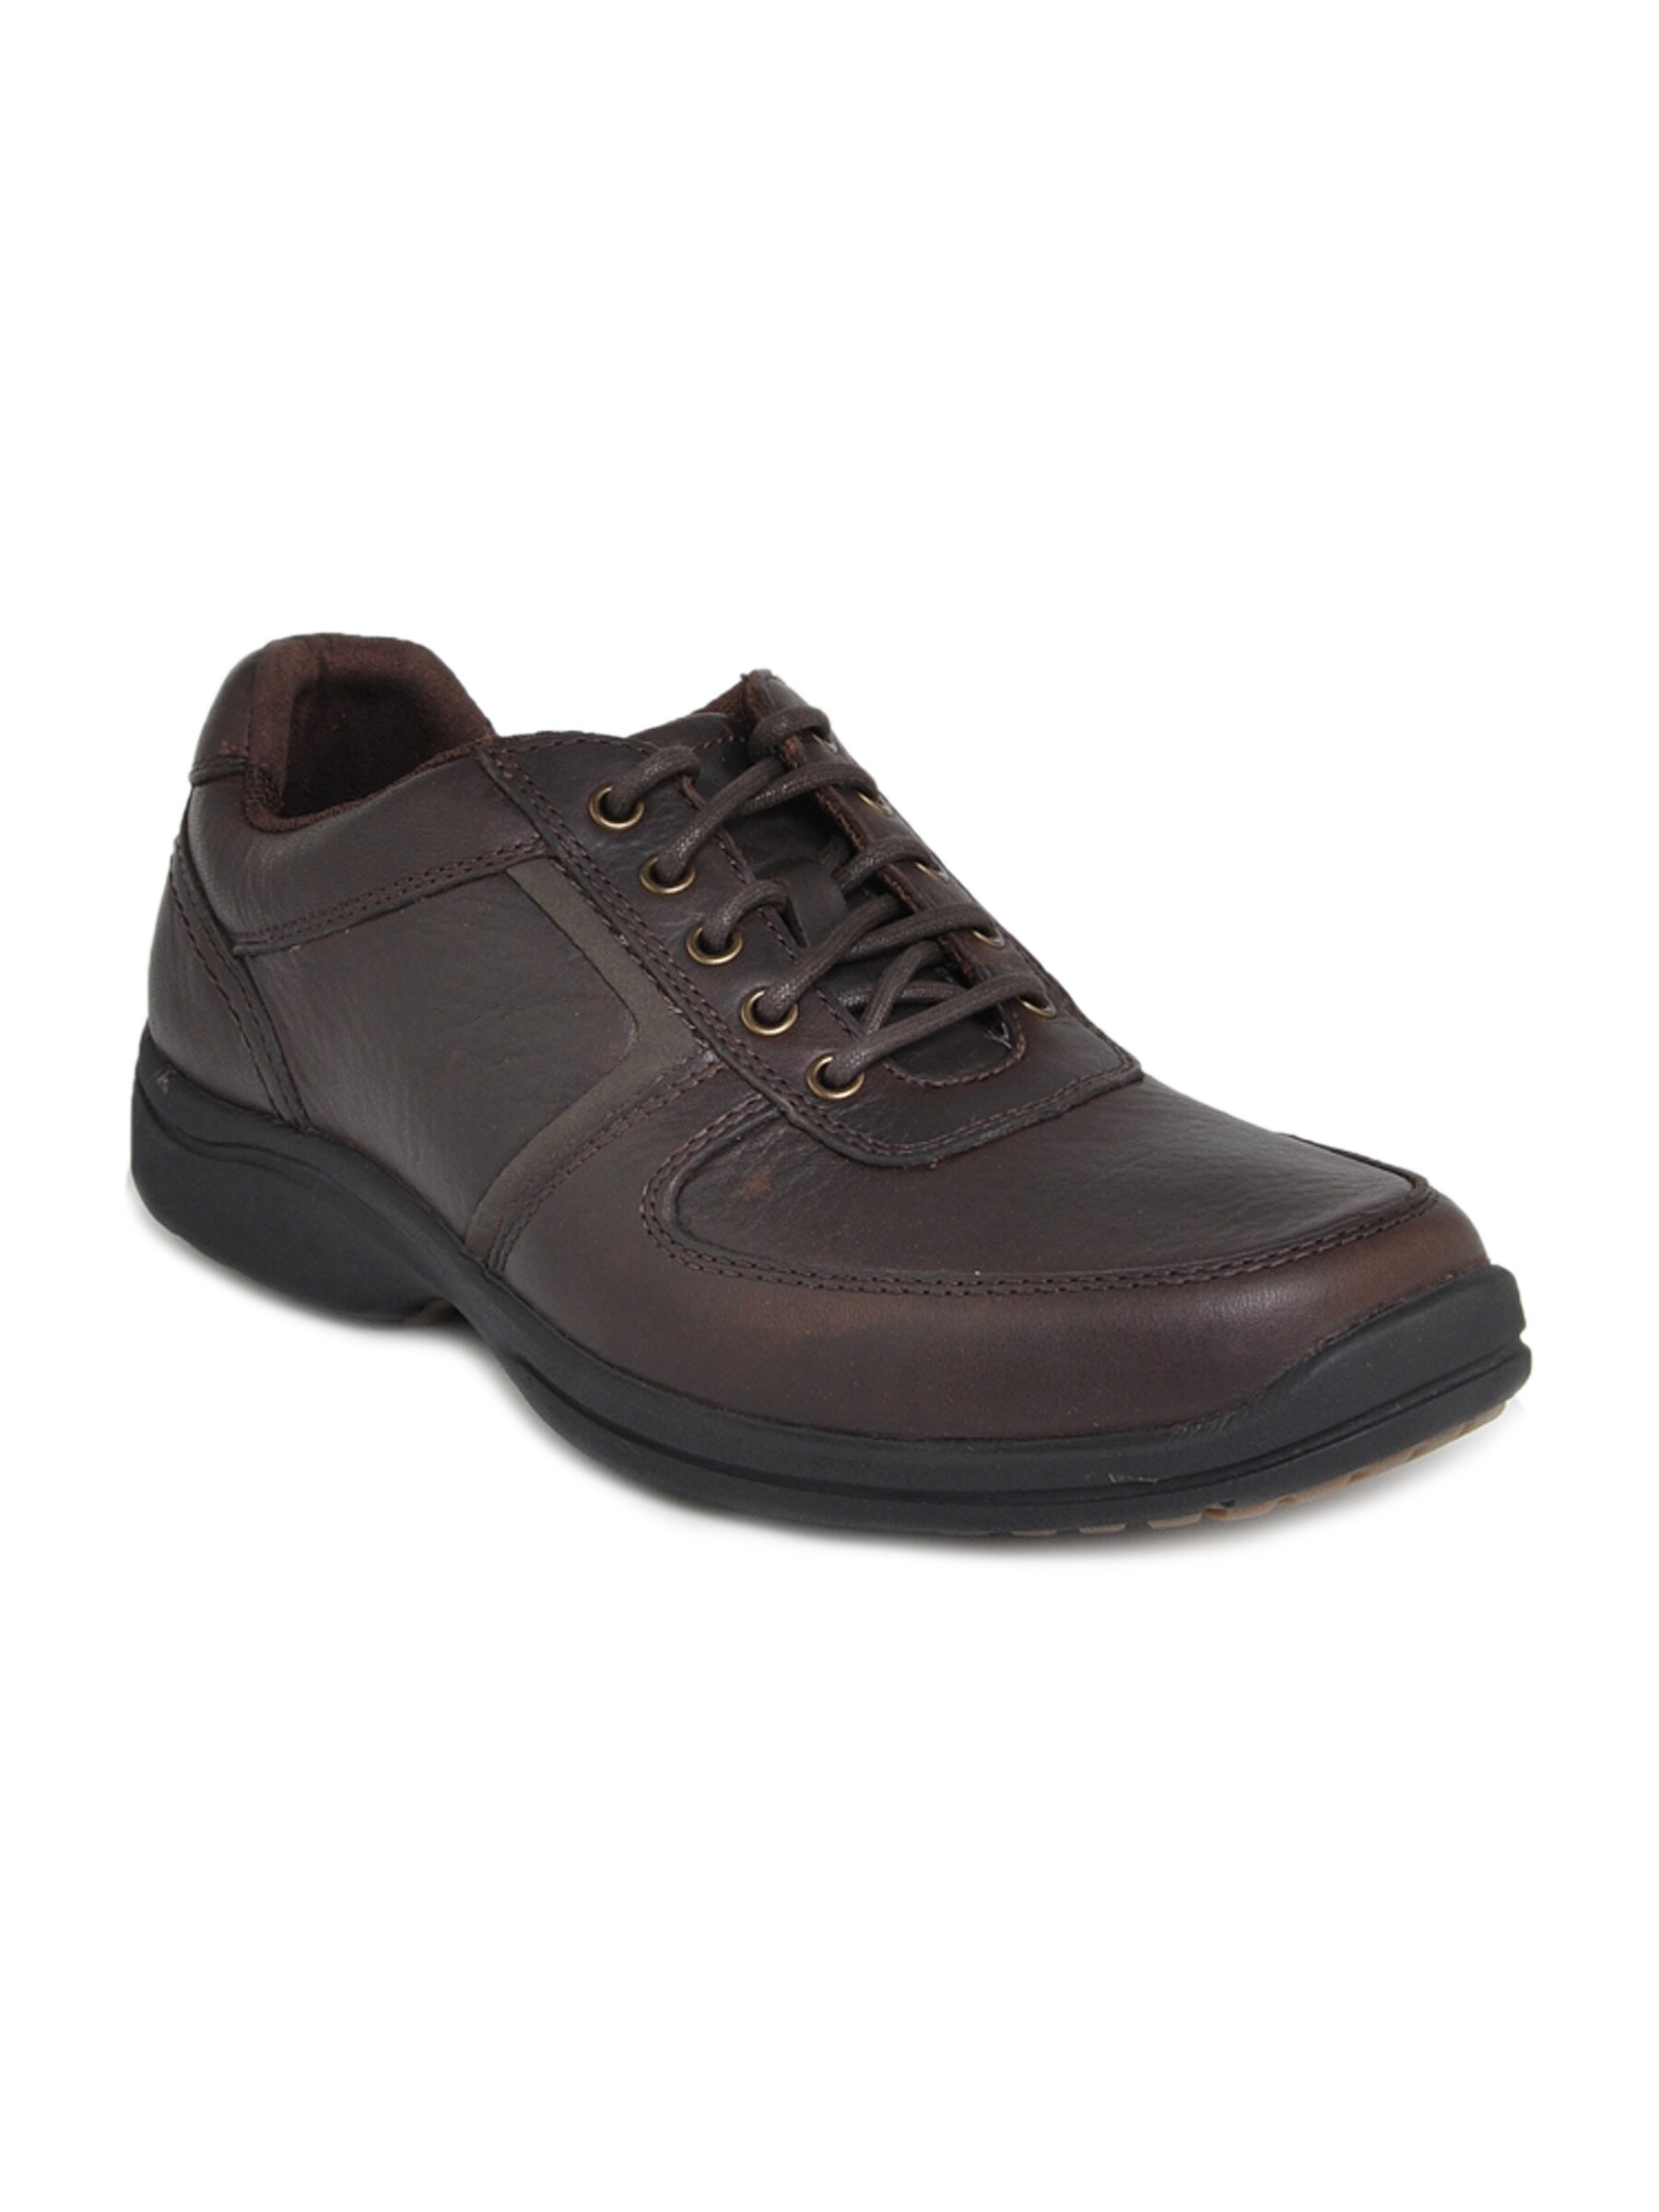 Rockport Men Tr Bal Brown Casual Shoes